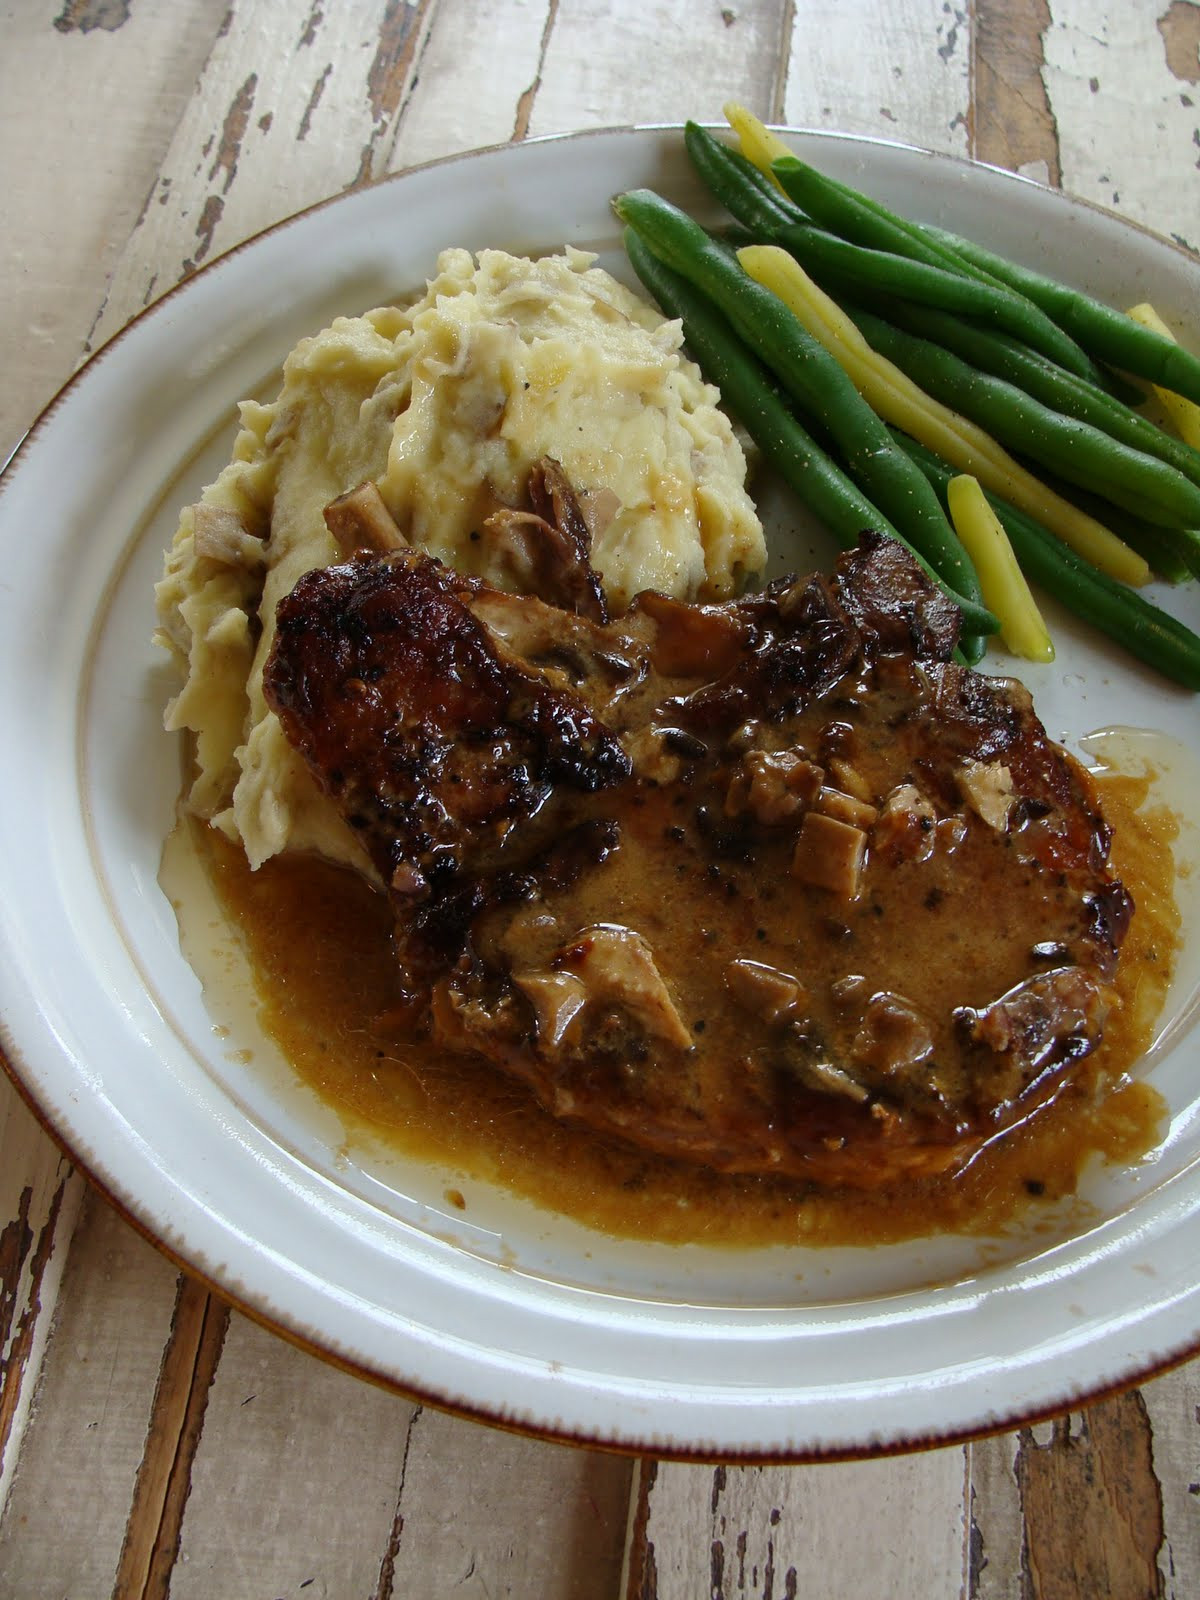 Pork Chops In Slow Cooker Recipes
 Just Cooking Slow Cooker Pork Chops with Mushroom Gravy